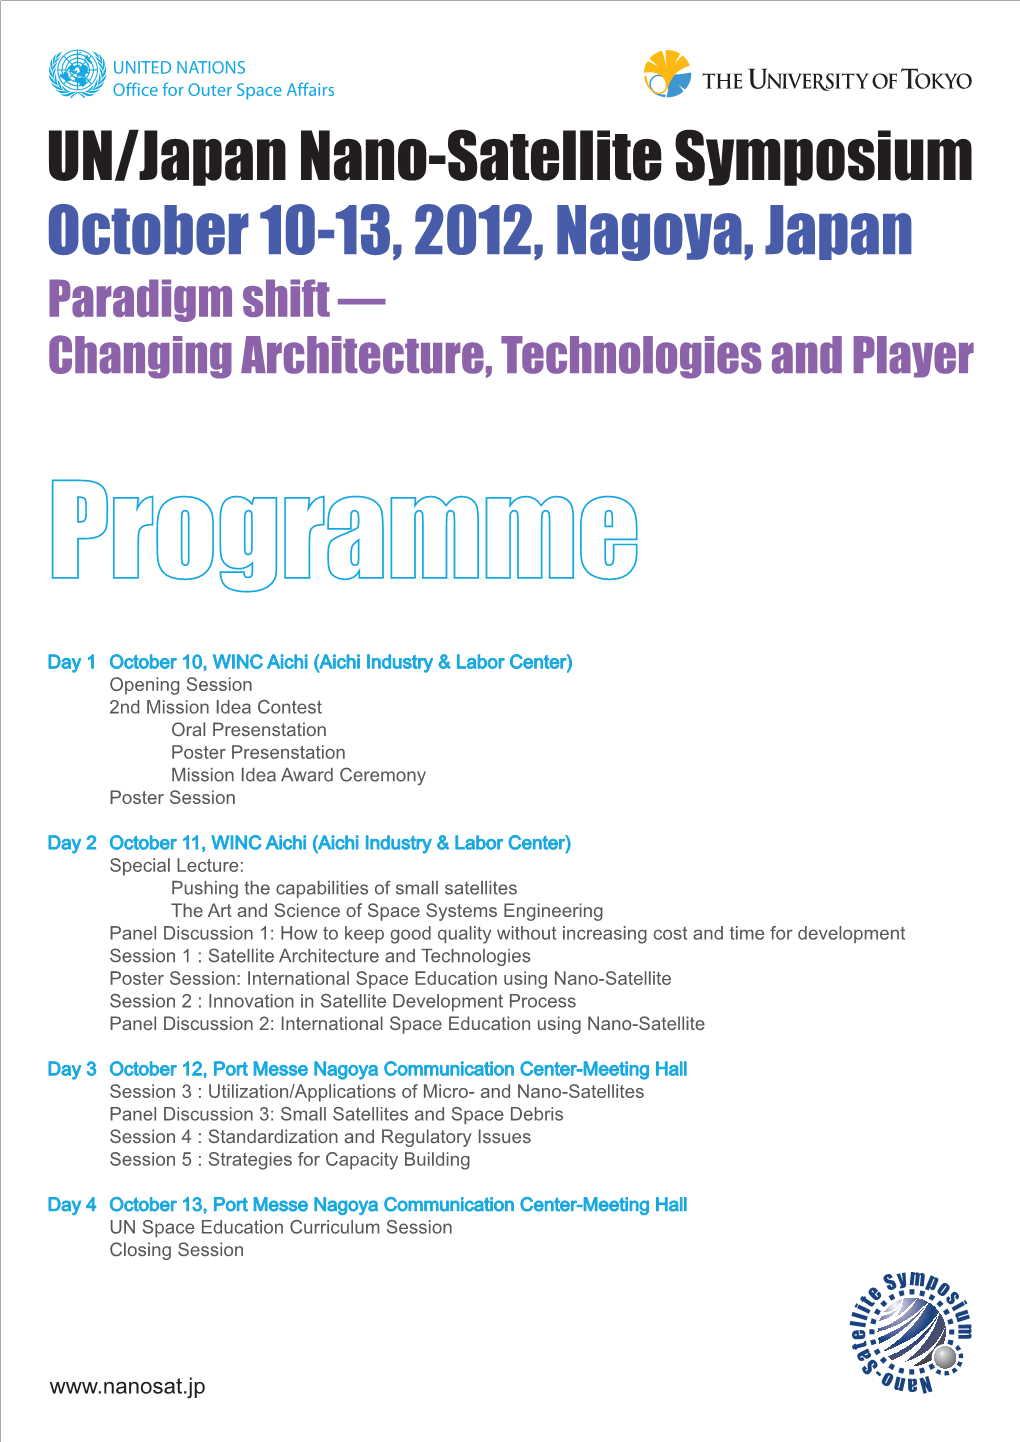 Changing Architecture, Technologies and Player Programme